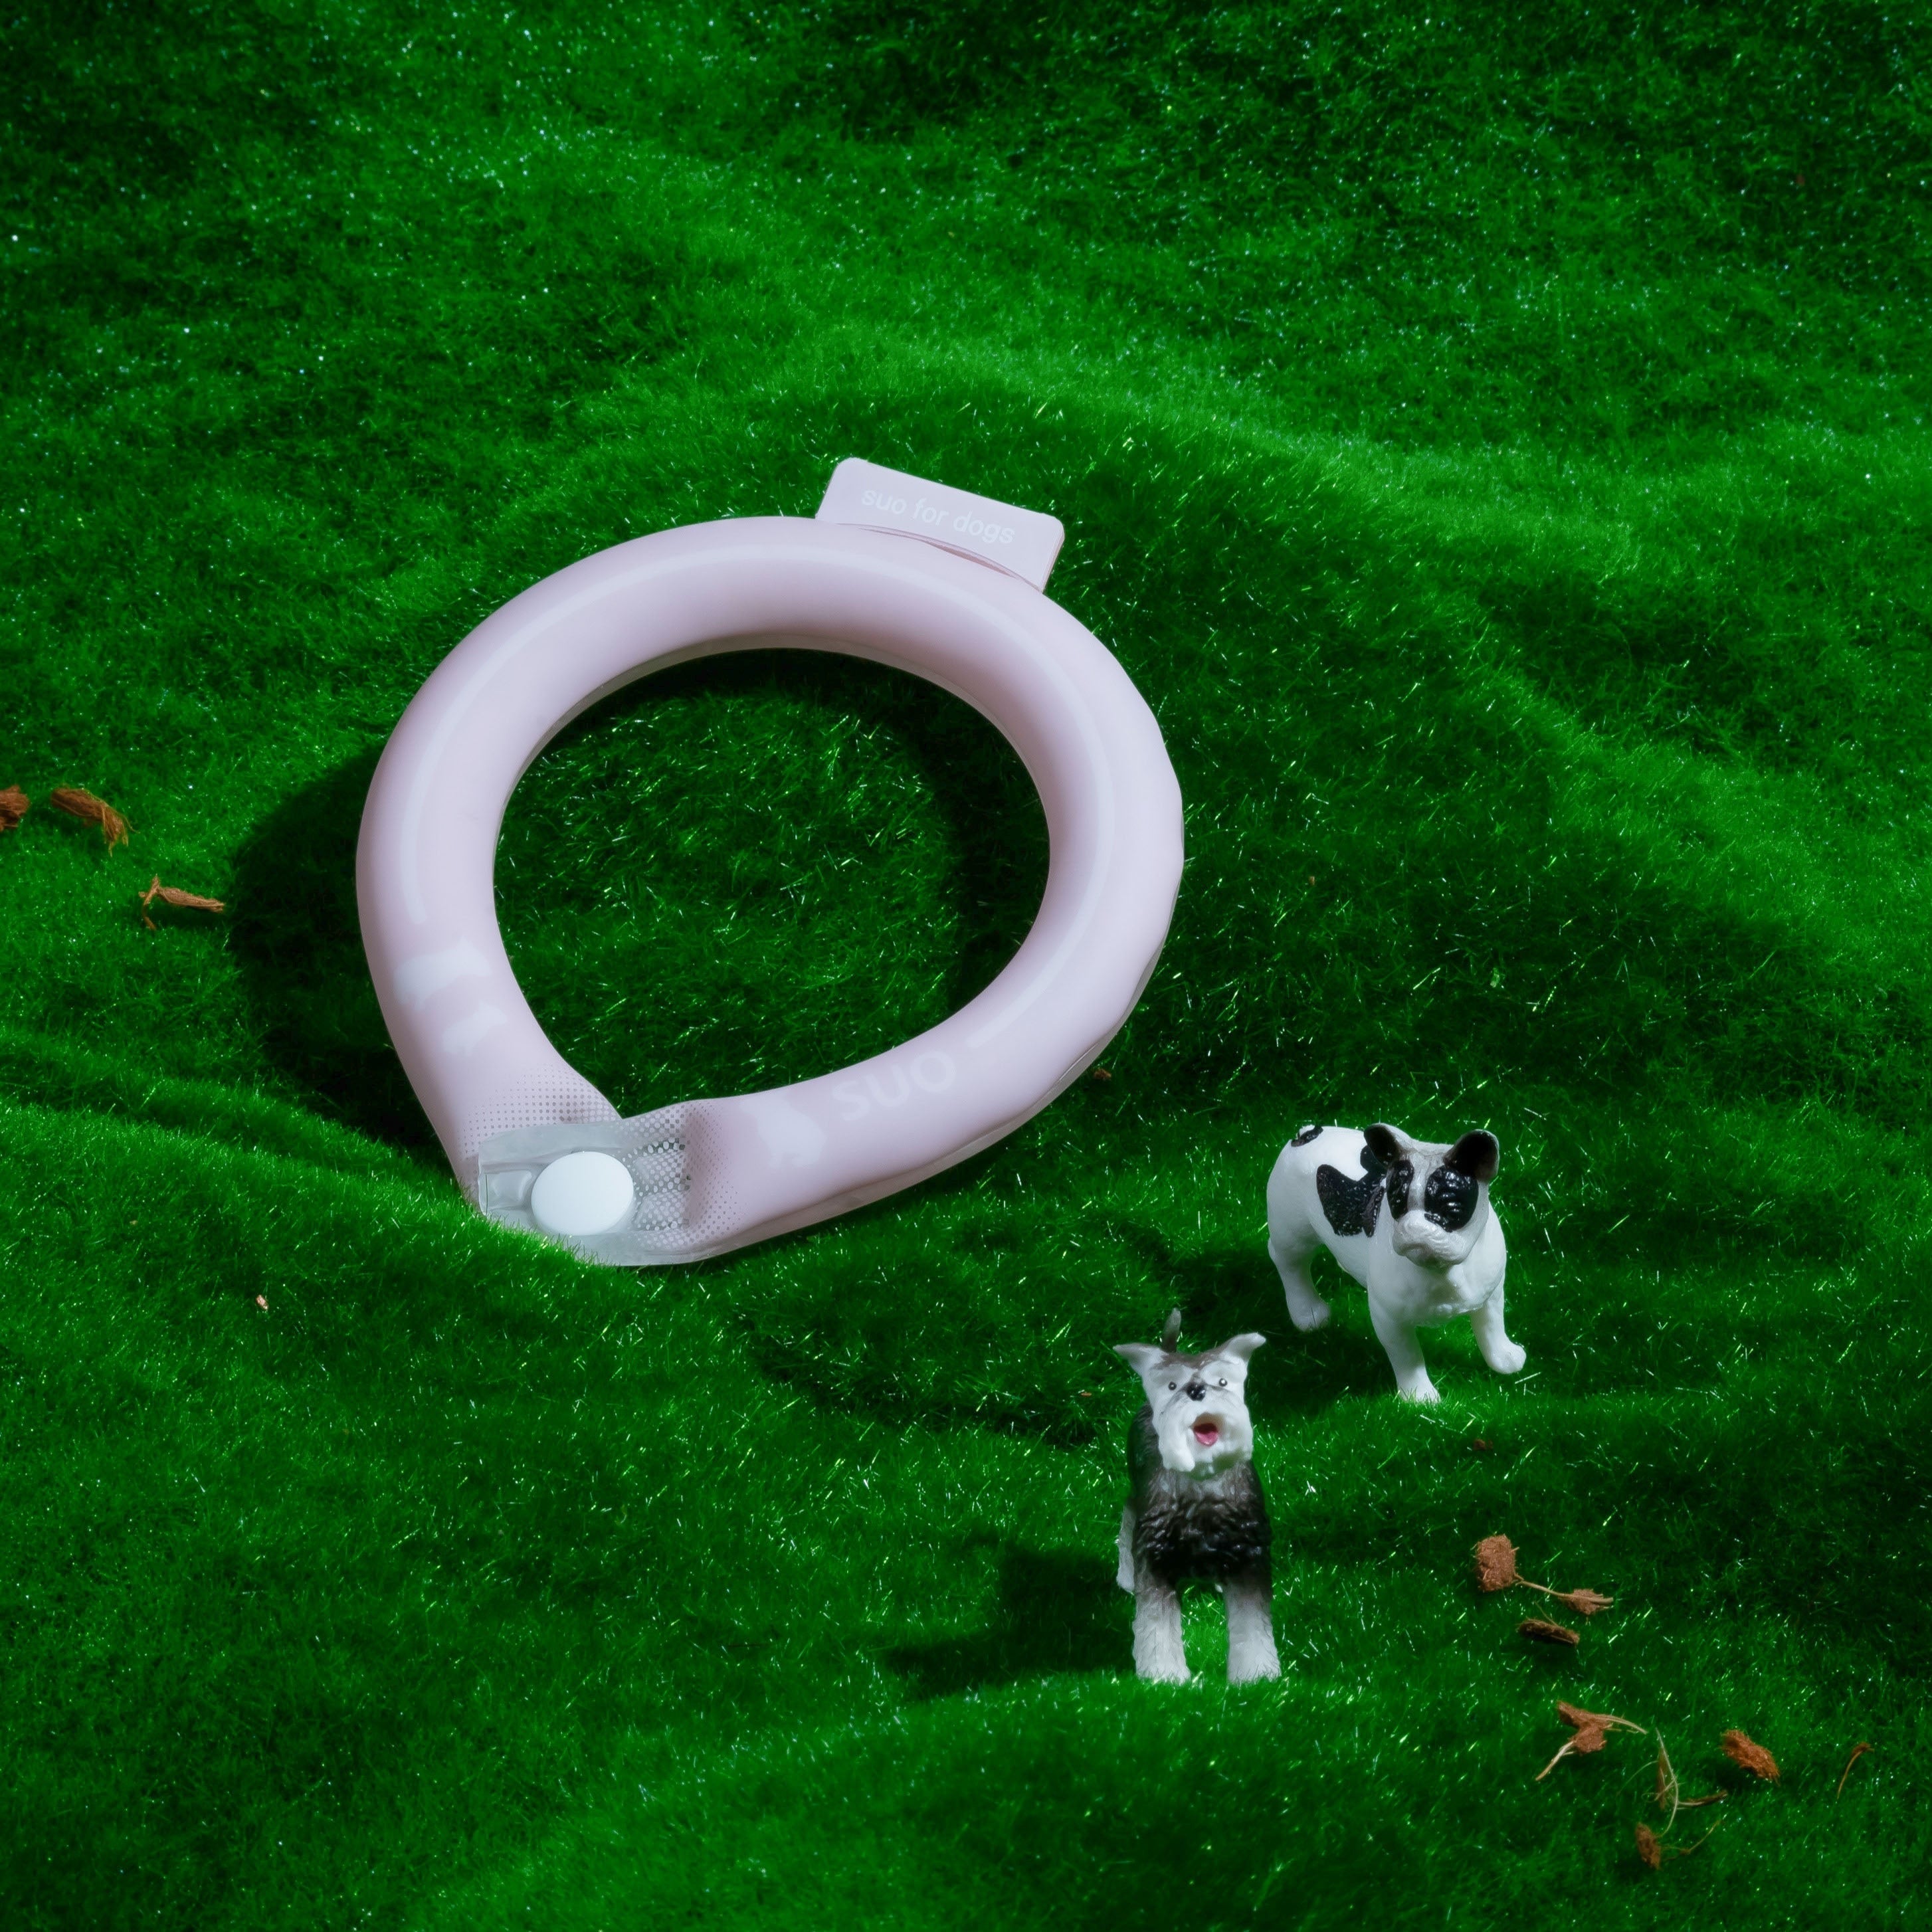 SUO RING 28°ICE for dogs line ボタン付